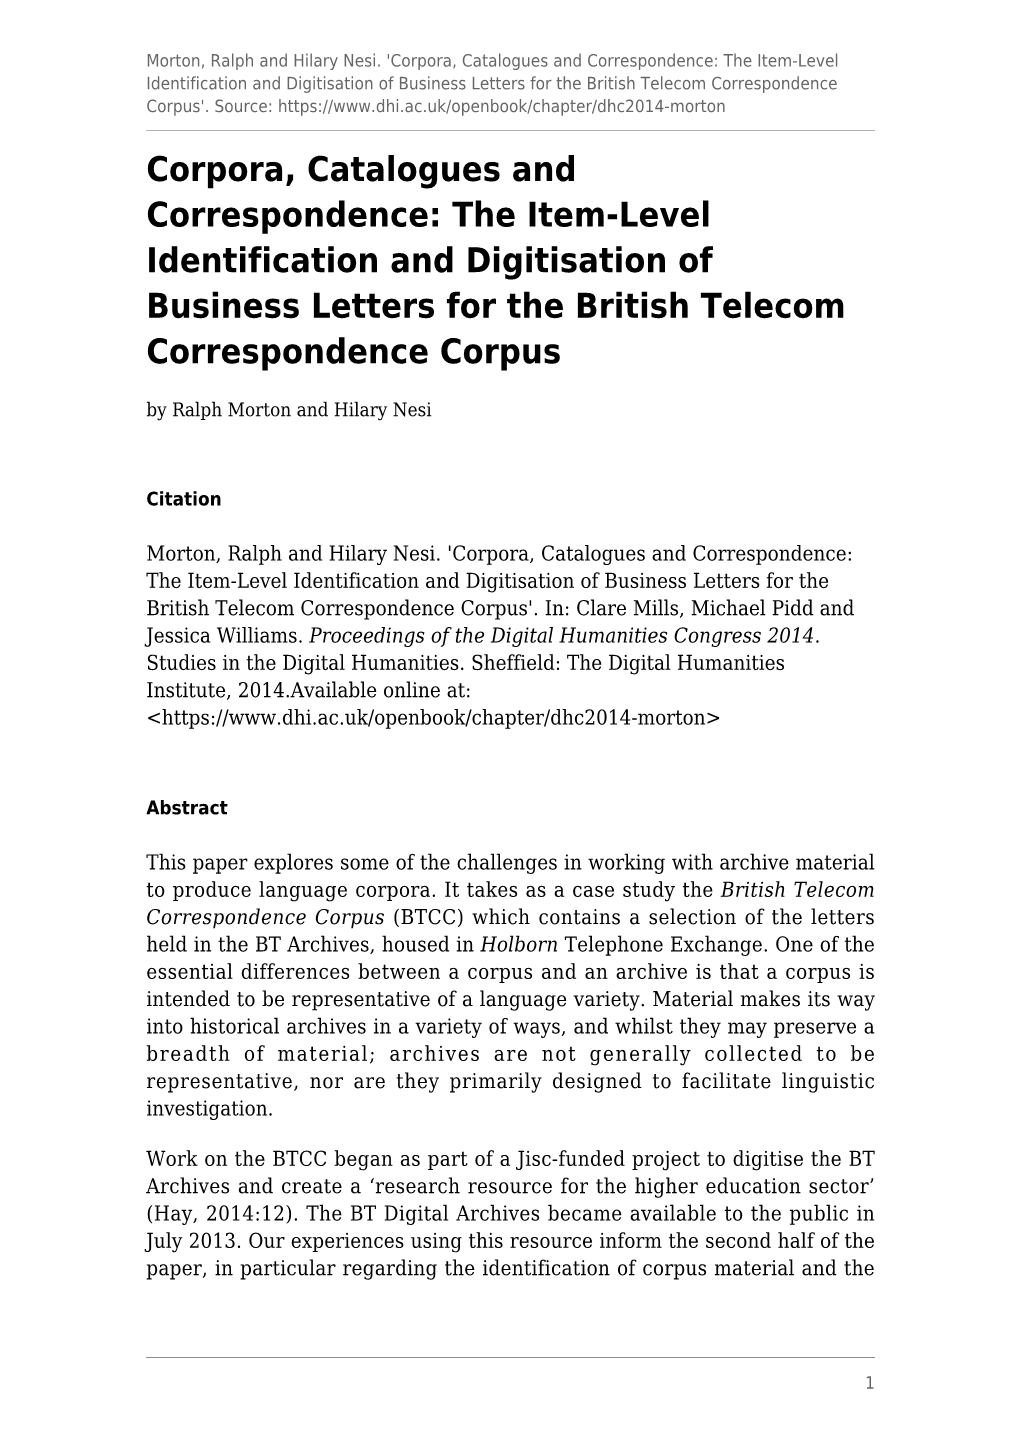 Corpora, Catalogues and Correspondence: the Item-Level Identification and Digitisation of Business Letters for the British Telecom Correspondence Corpus'